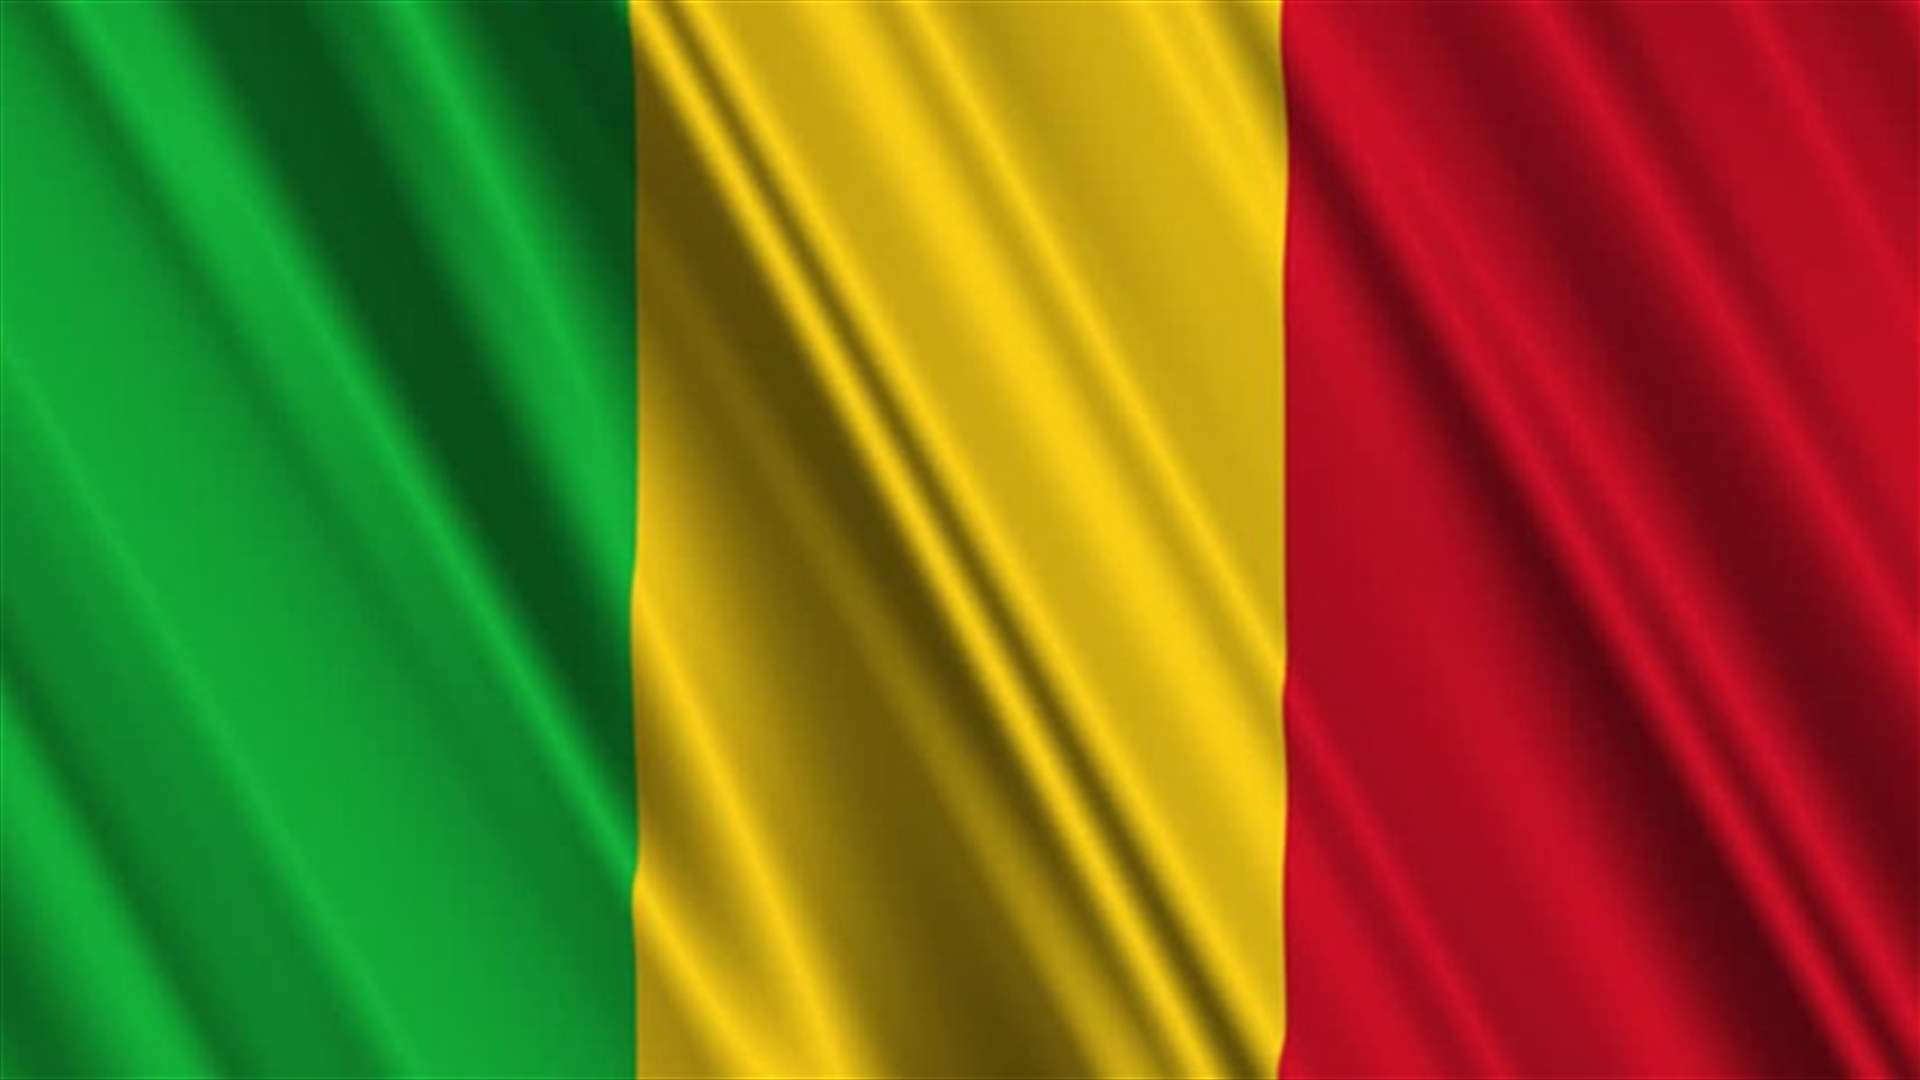 UN Security Council pushes peace deal implementation in Mali